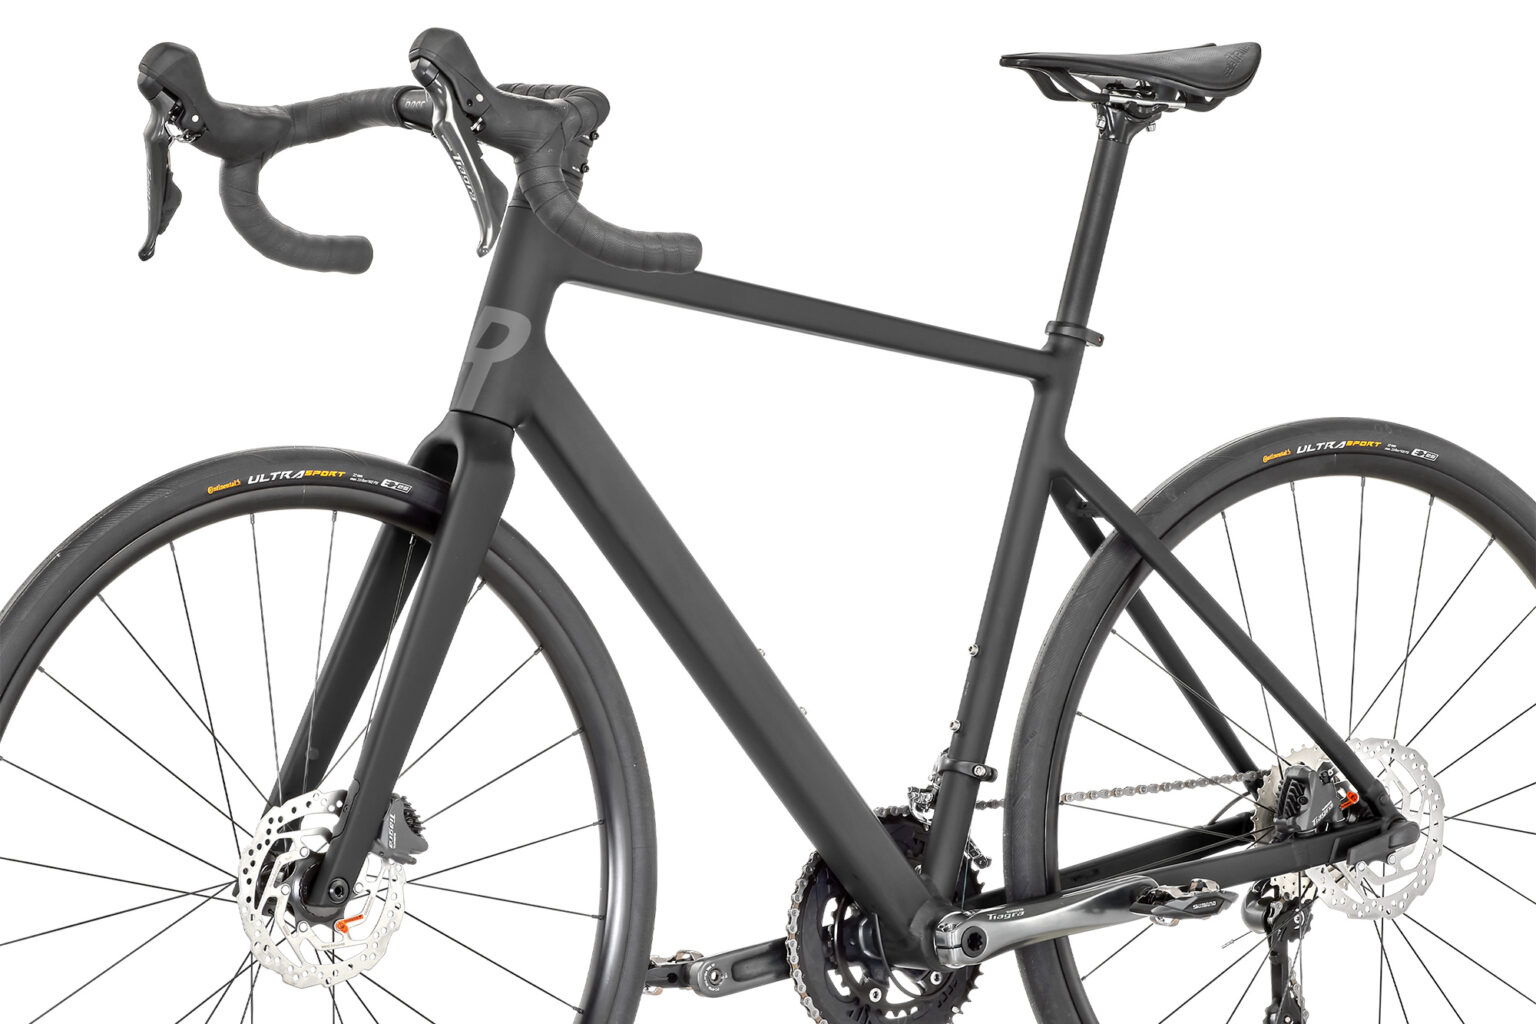 Rose Blend affordable all-in-one aluminum alloy road AND gravel bike, non-driveside frame detail